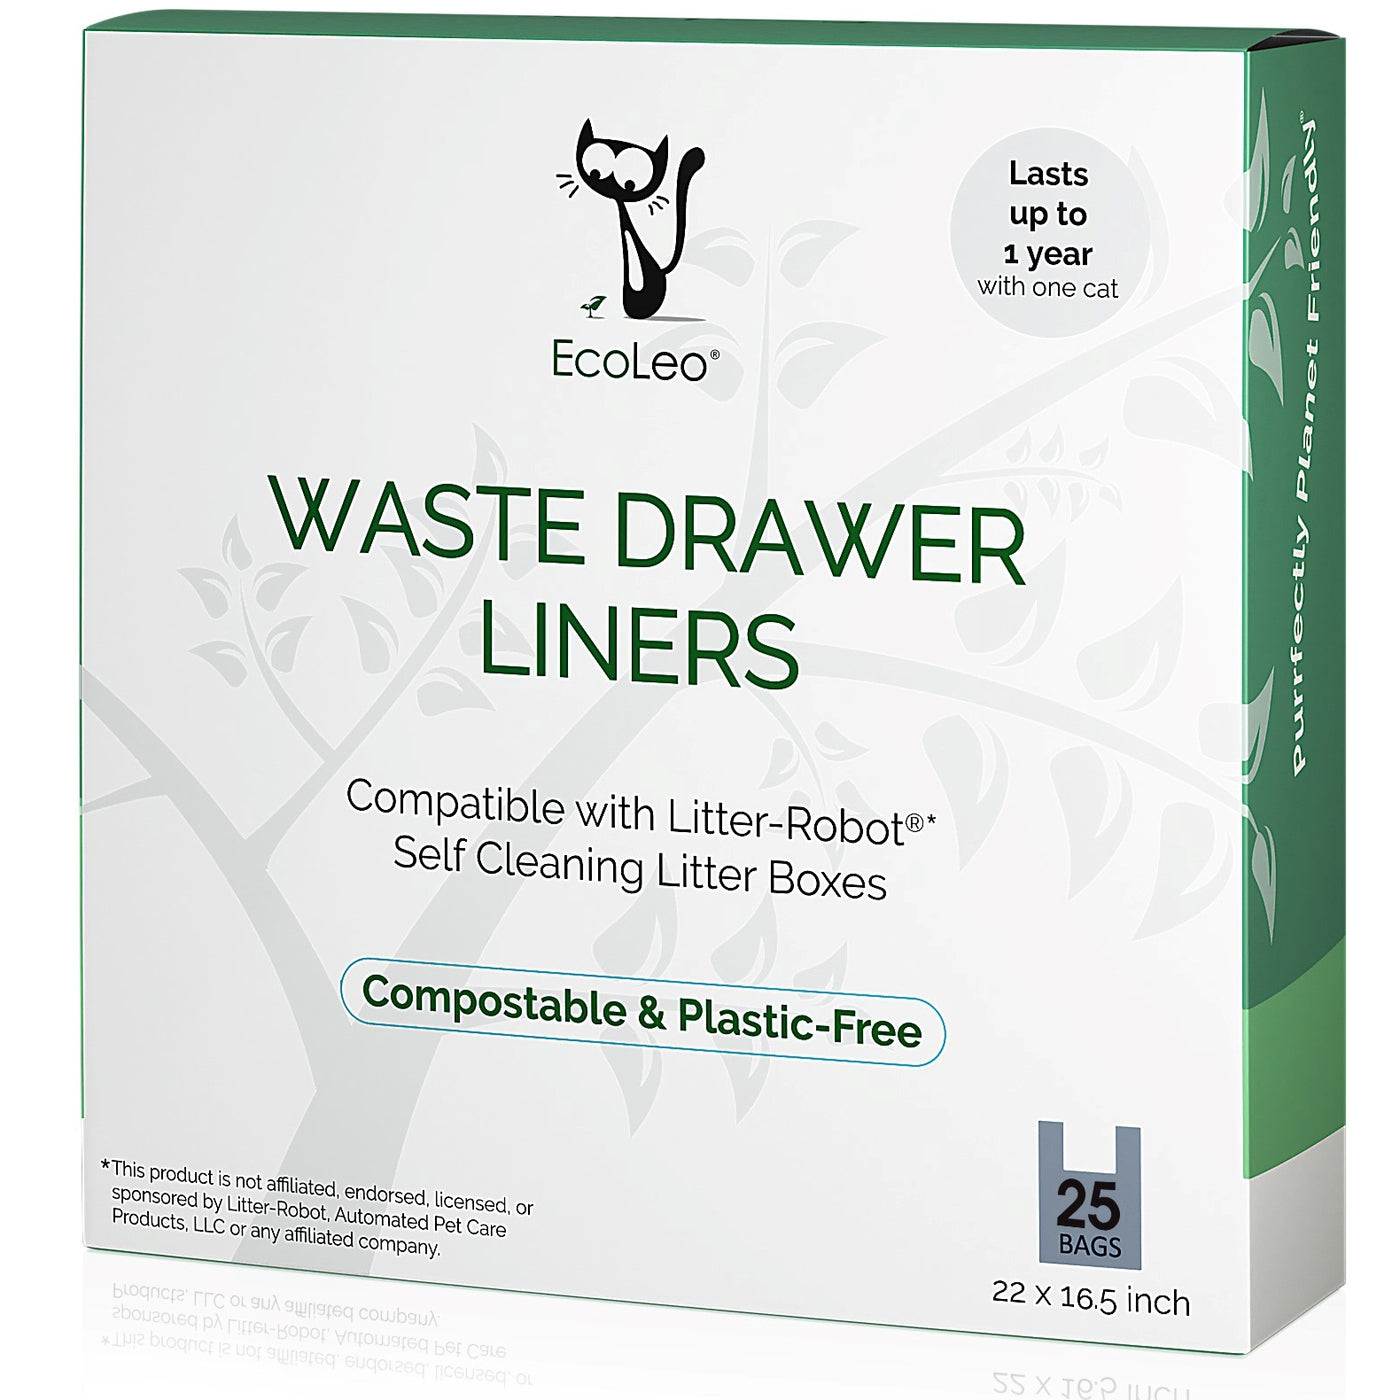 Litter Robot 3 Compatible Compostable Waste Drawer Liners